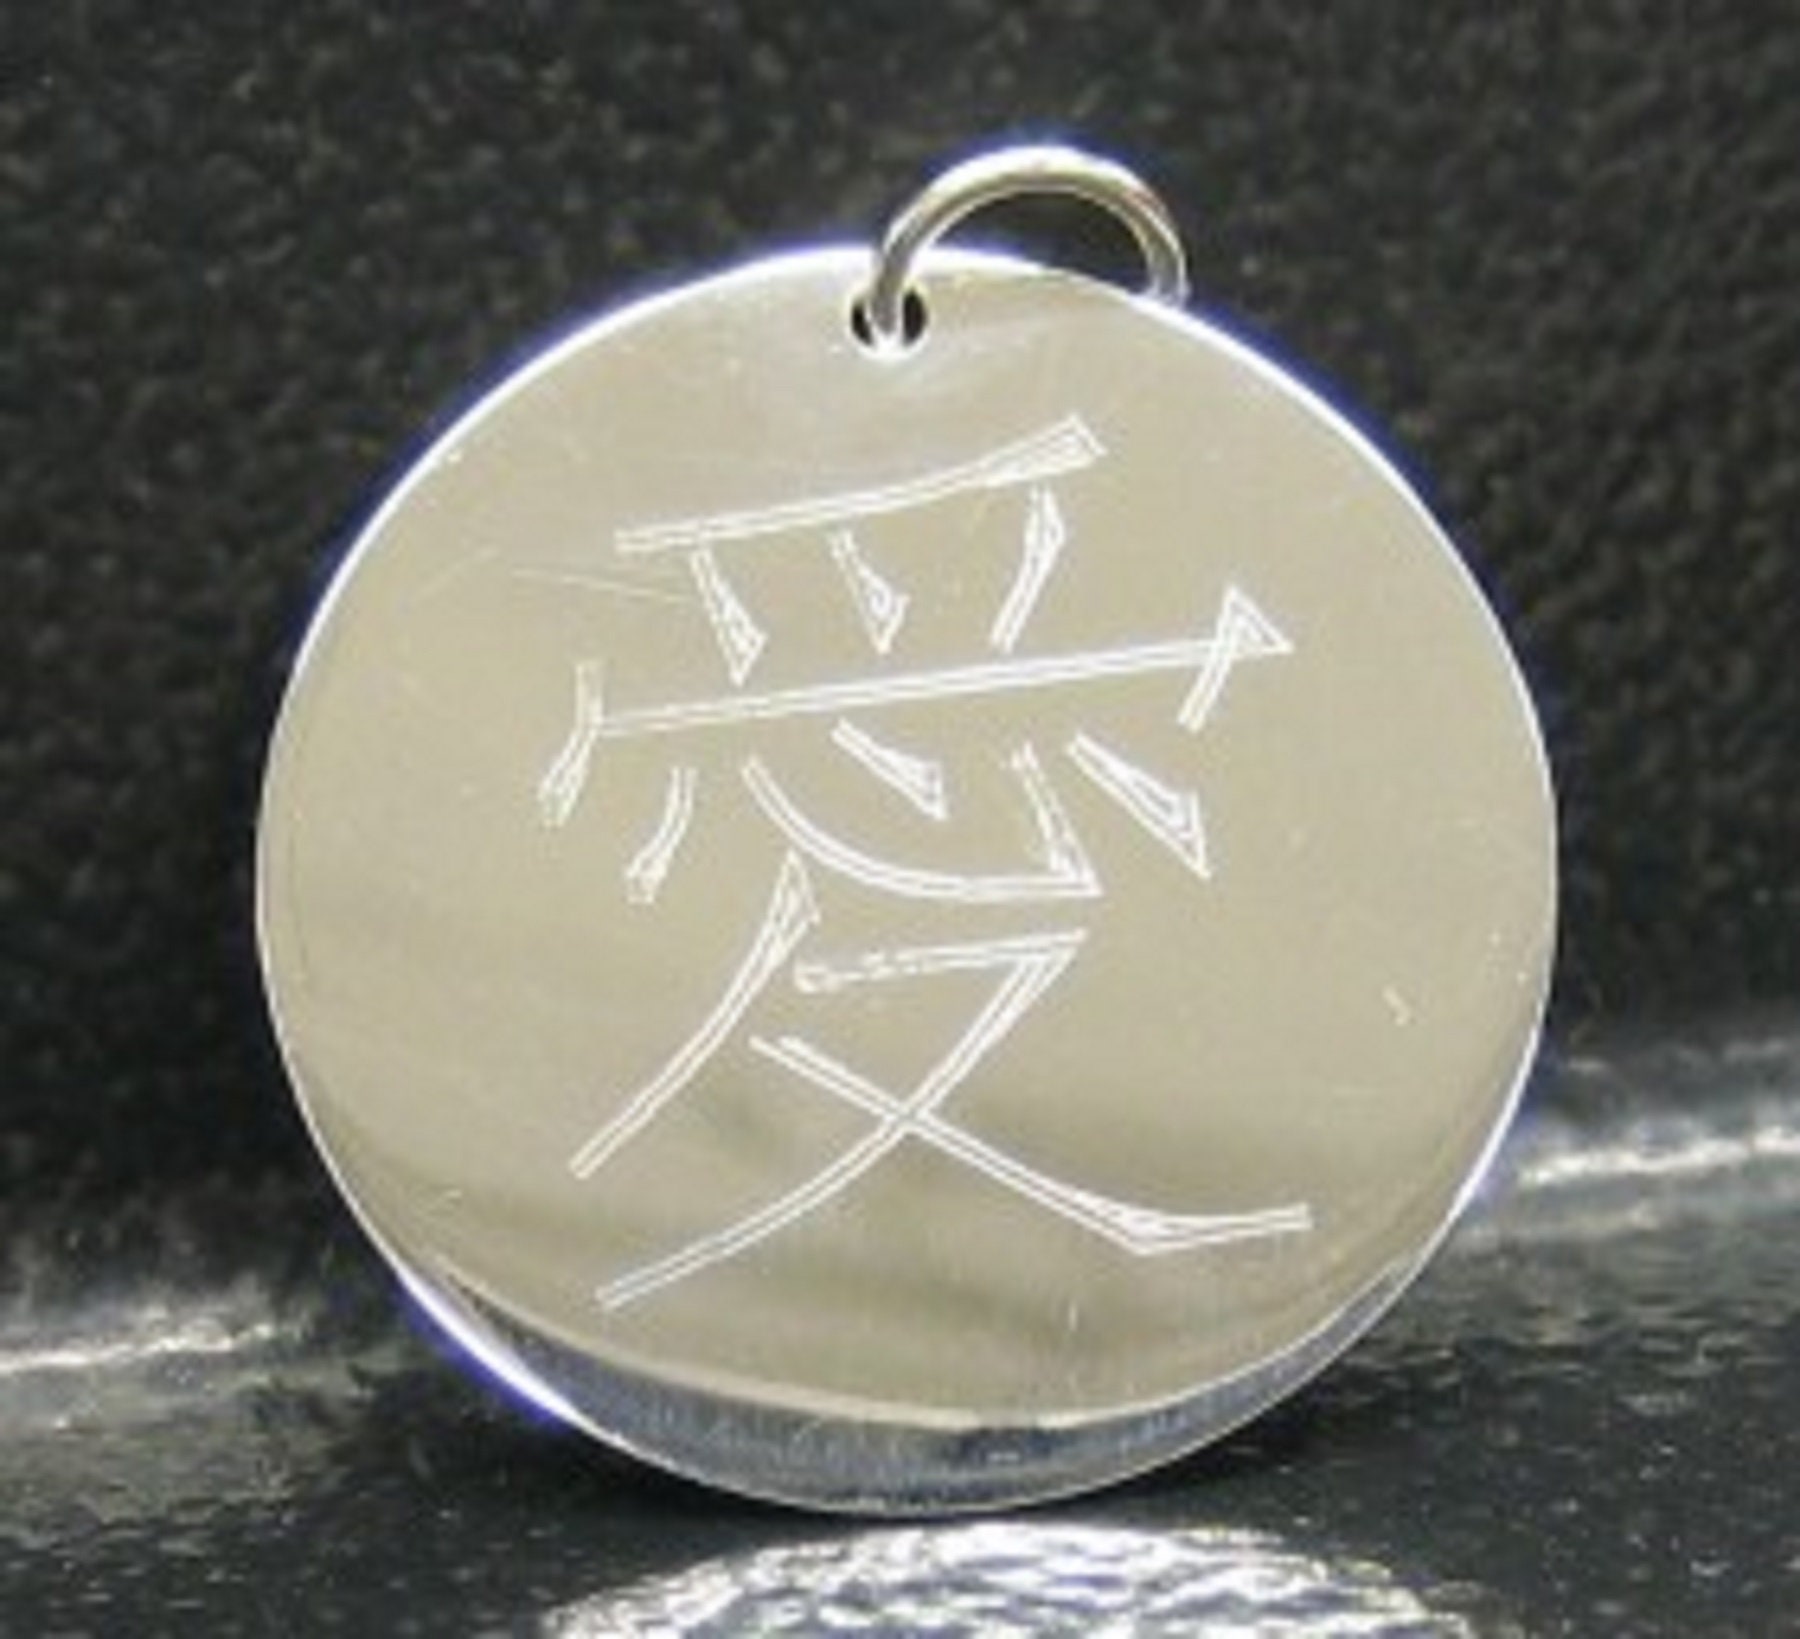 Chinese Symbol for Love Engraved on Sterling Silver Pendant - Etsy